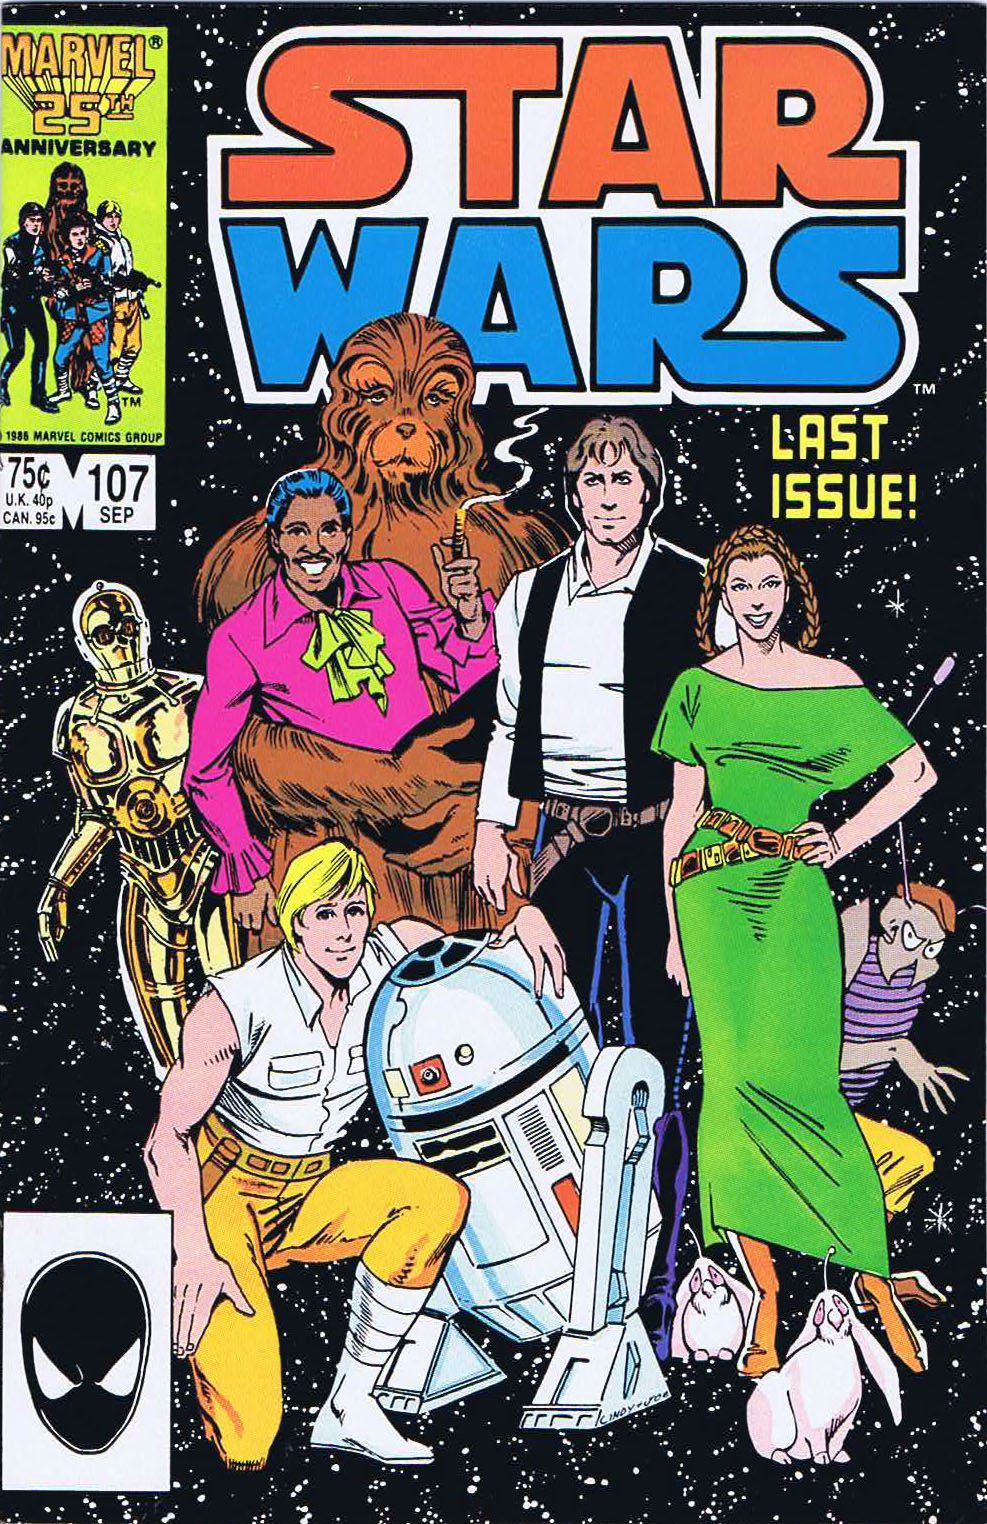 The Daily Crate | Throwback Thursday: Classic 'Star Wars' Comics Covers!